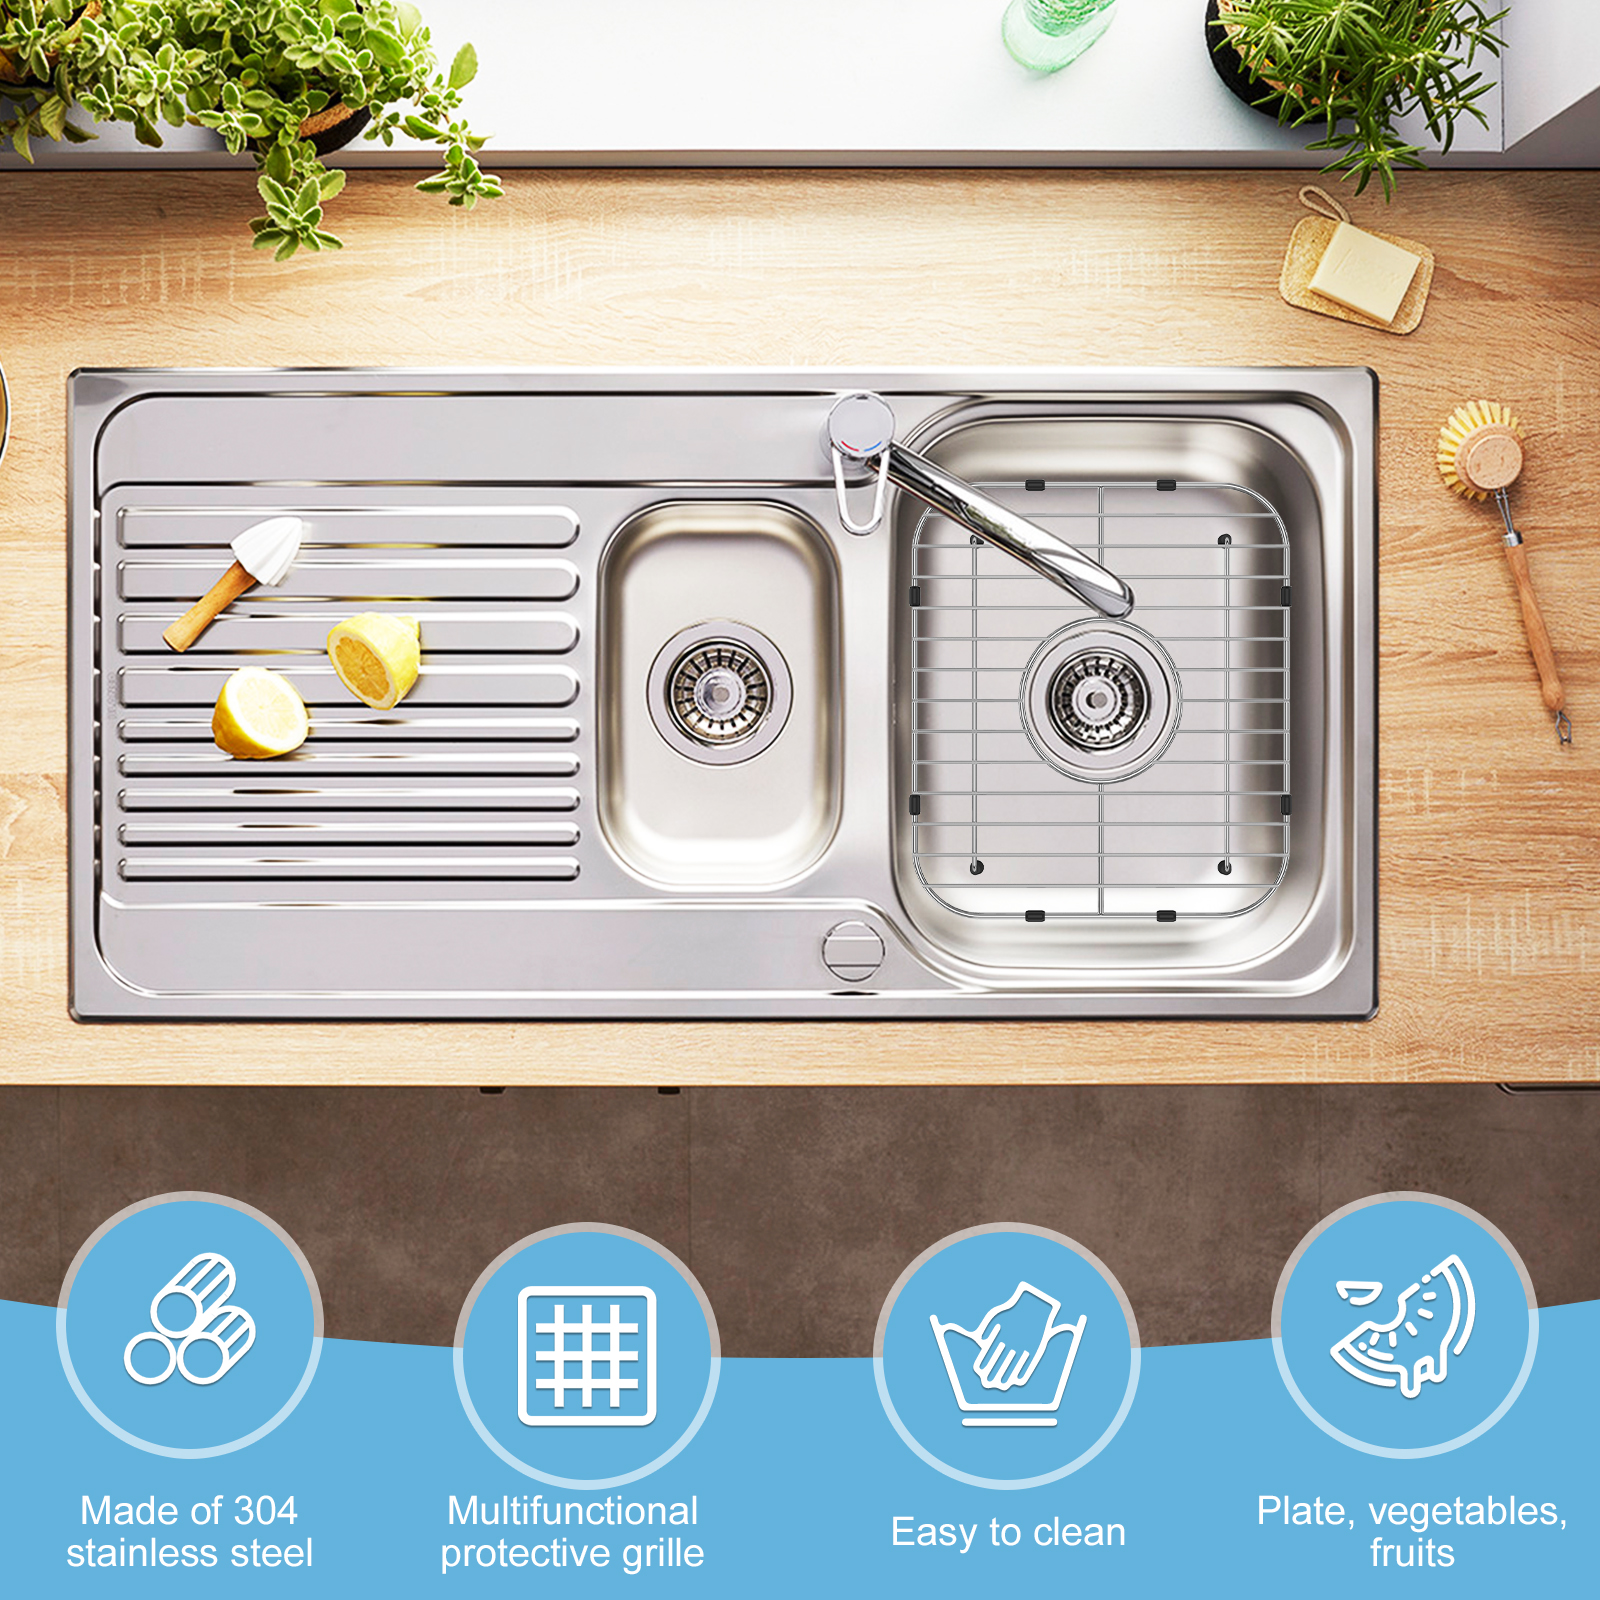 Stainless Steel Sink Grids & Grates